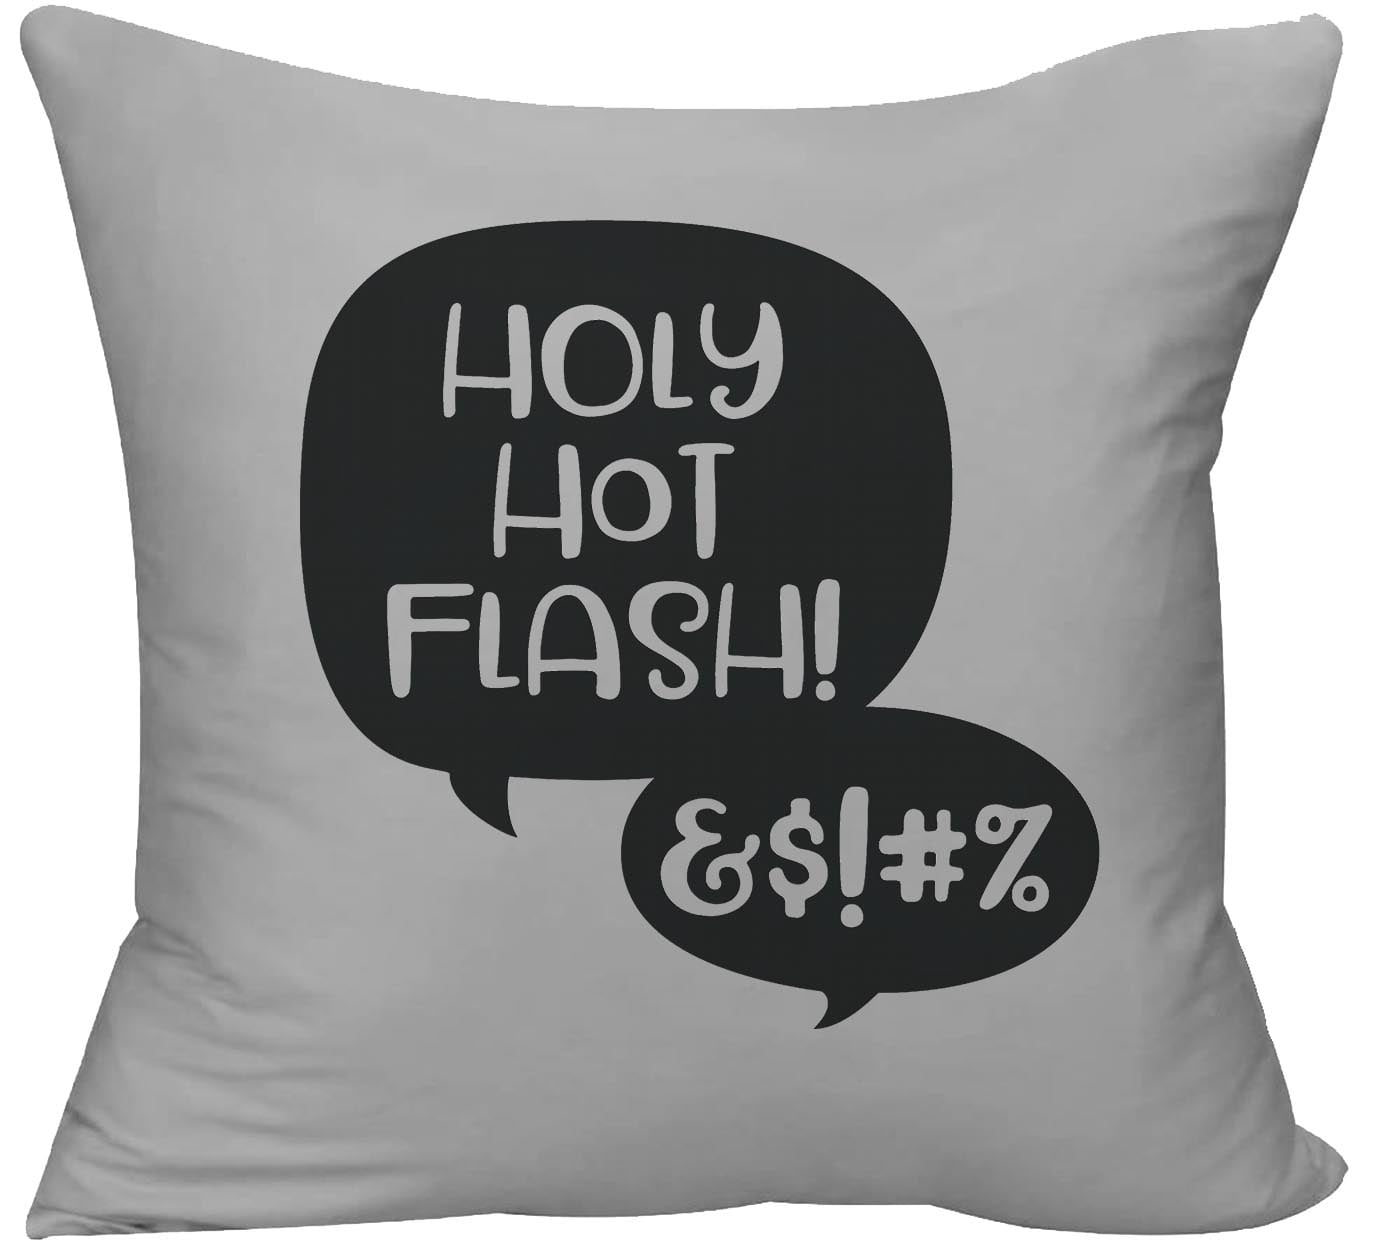 Holy hot flash! quotes funny women menopause Decorative Throw Pillow cover  18 x 18 Pillow Grey Funny Gift 